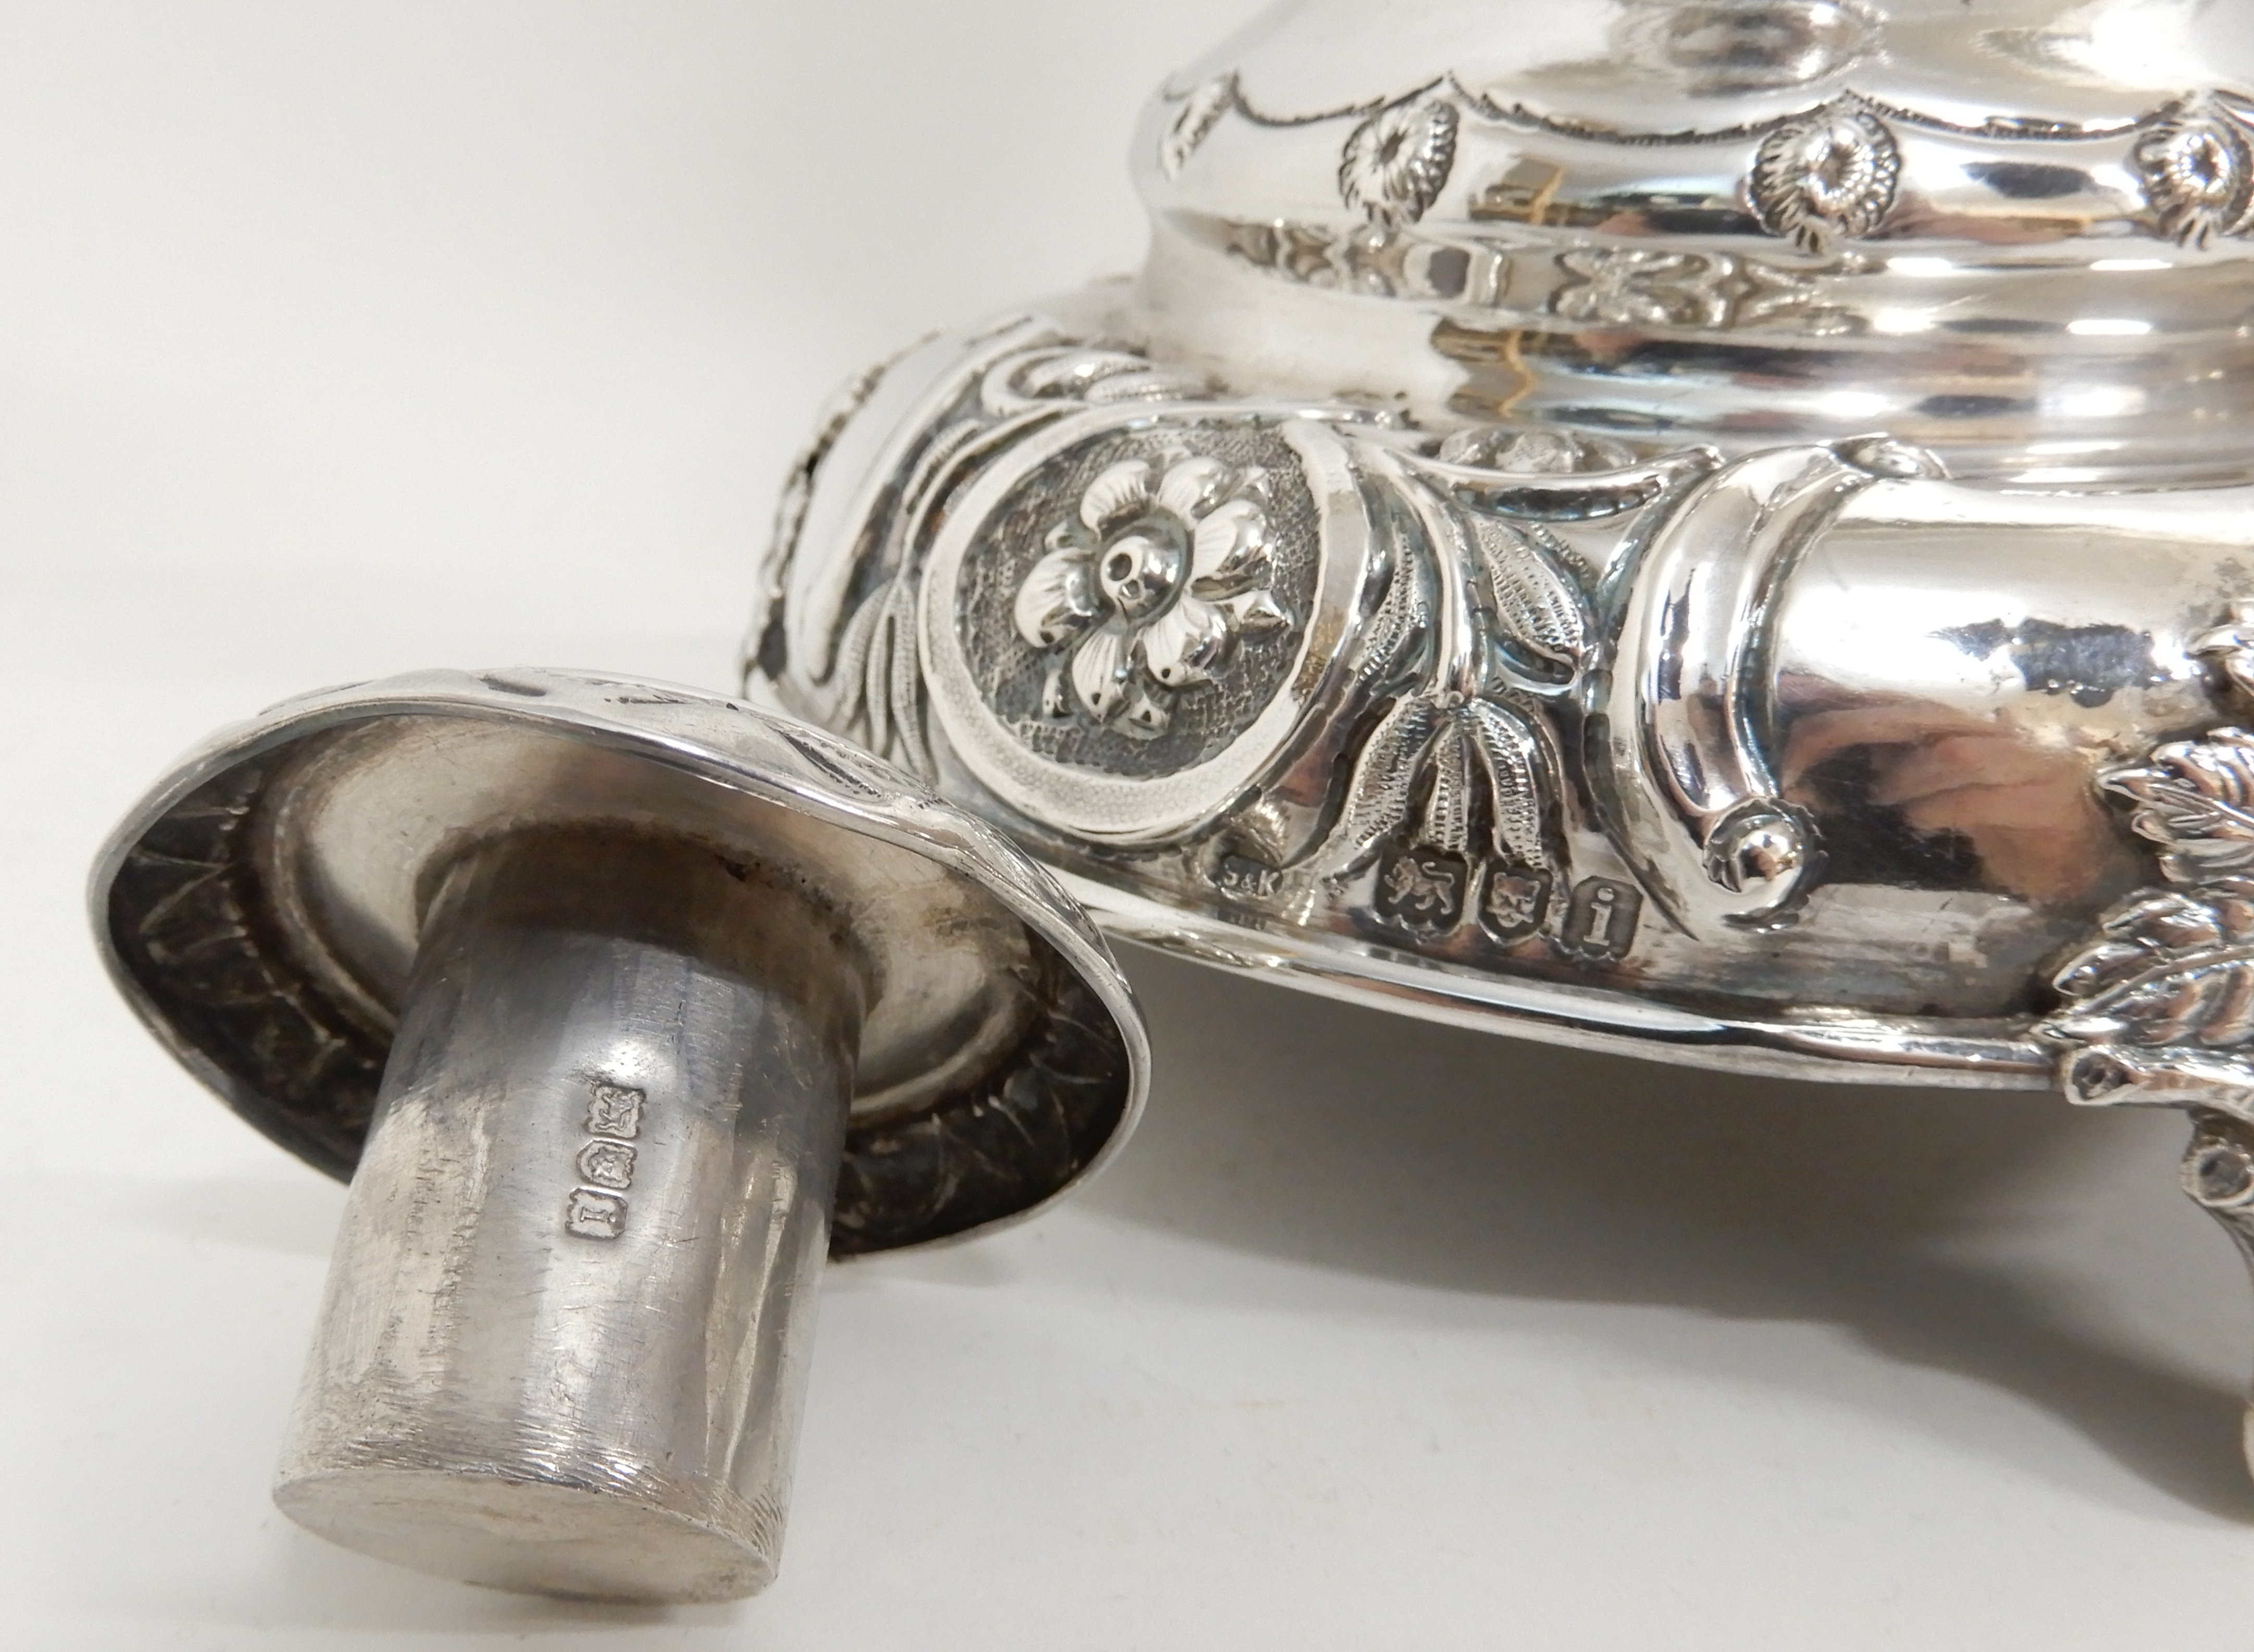 A PAIR OF VICTORIAN SILVER CANDLESTICKS by Slade & Kempton, London 1902, with removable drip pans, - Image 5 of 9